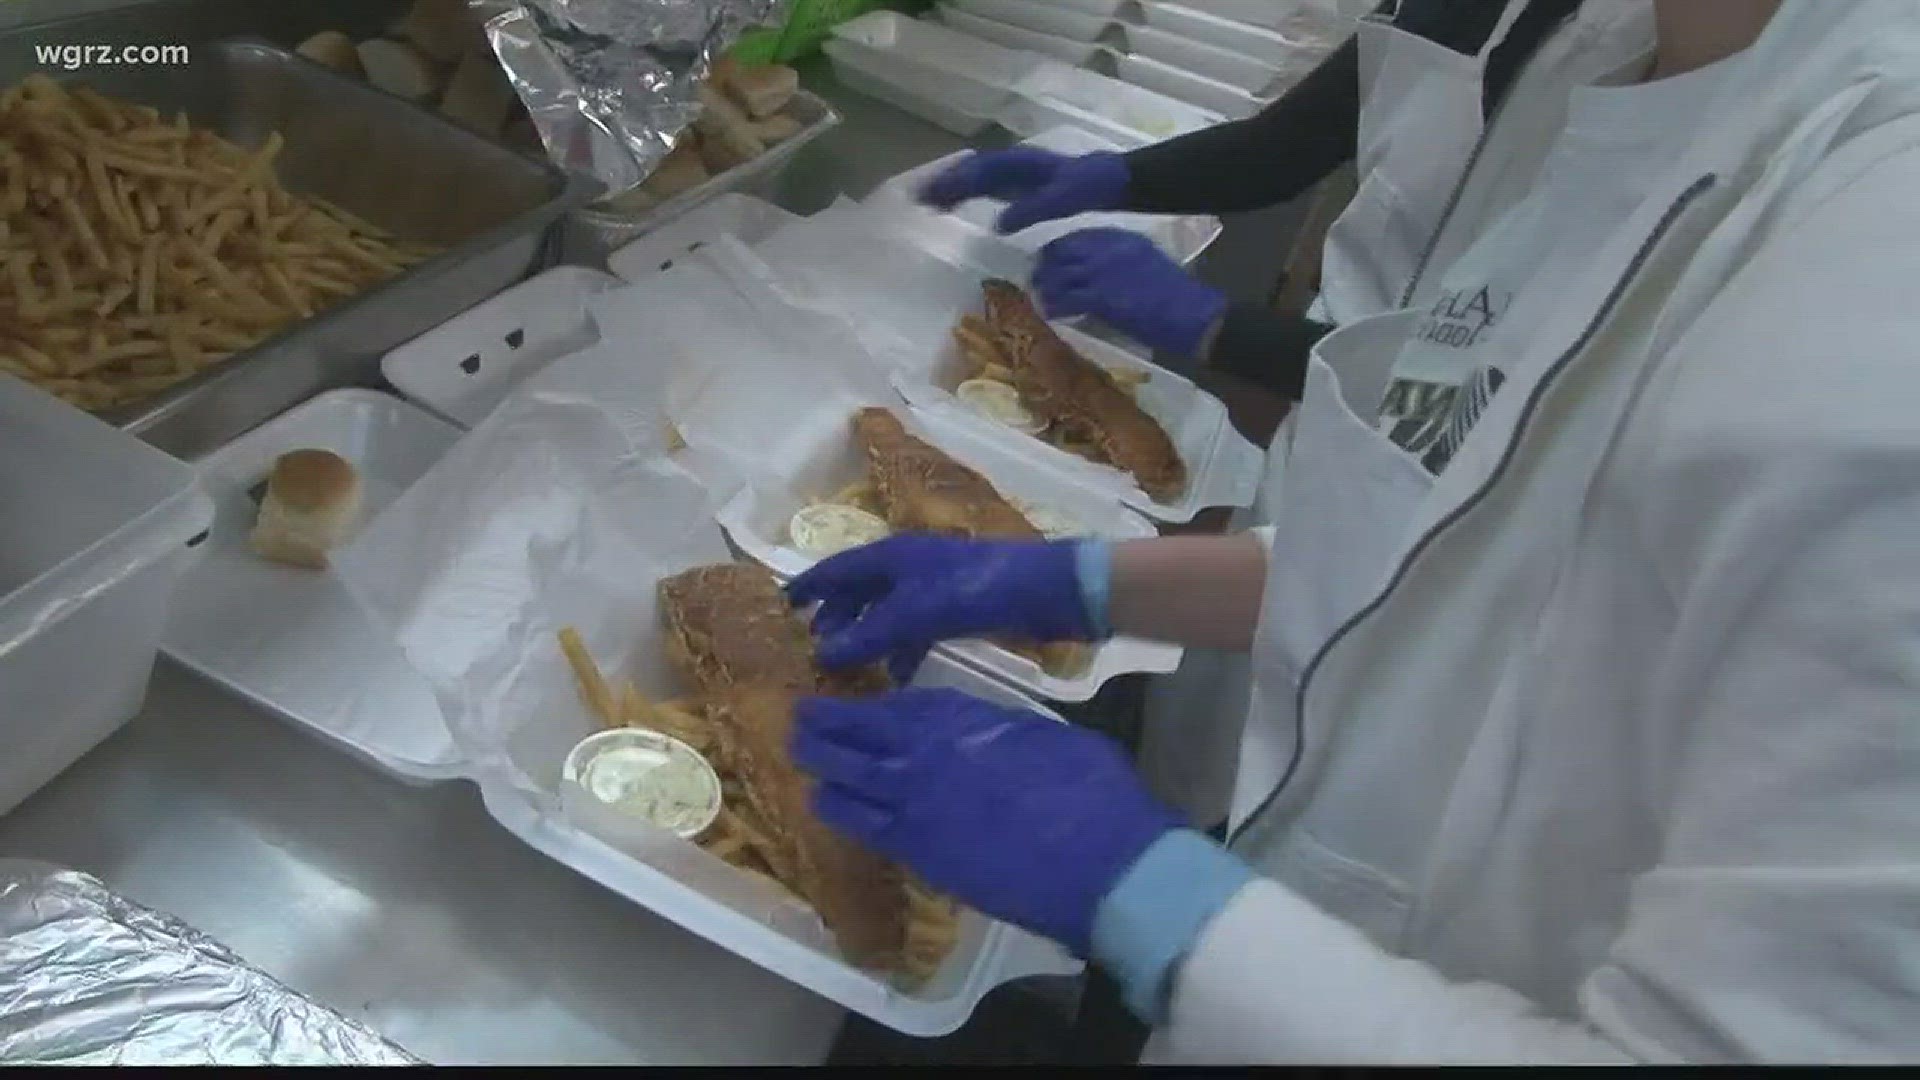 Daybreak's Stephanie Barnes tells us how the Kenilworth Fire Department gets ready to serve fish fry.